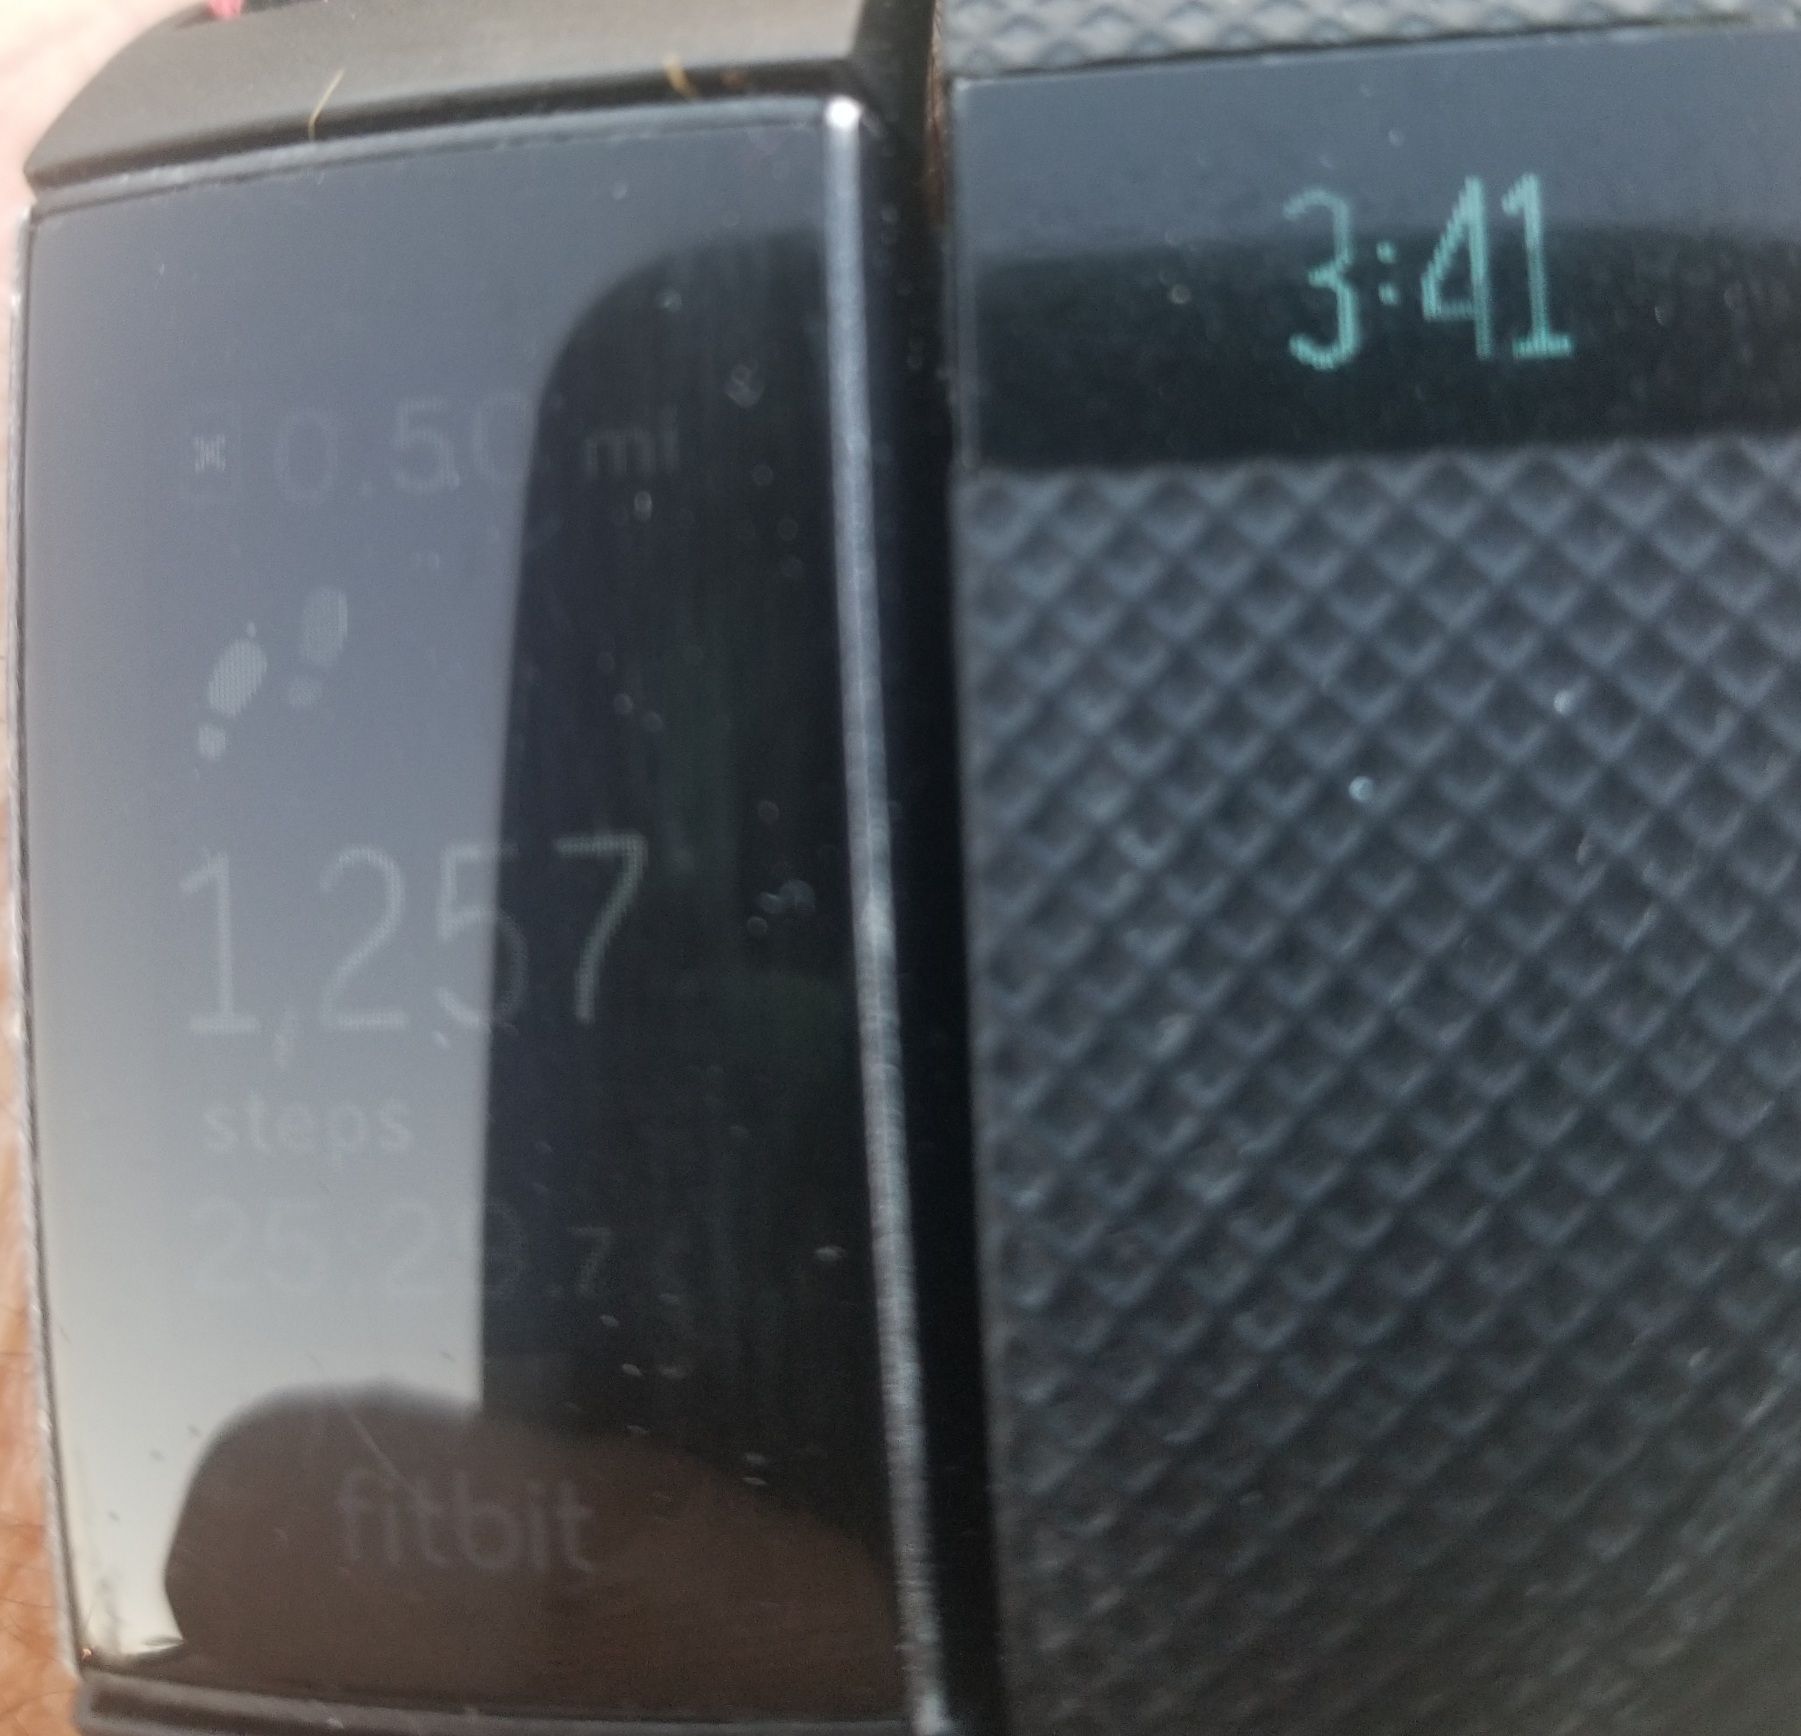 fitbit charge 3 brightness not working